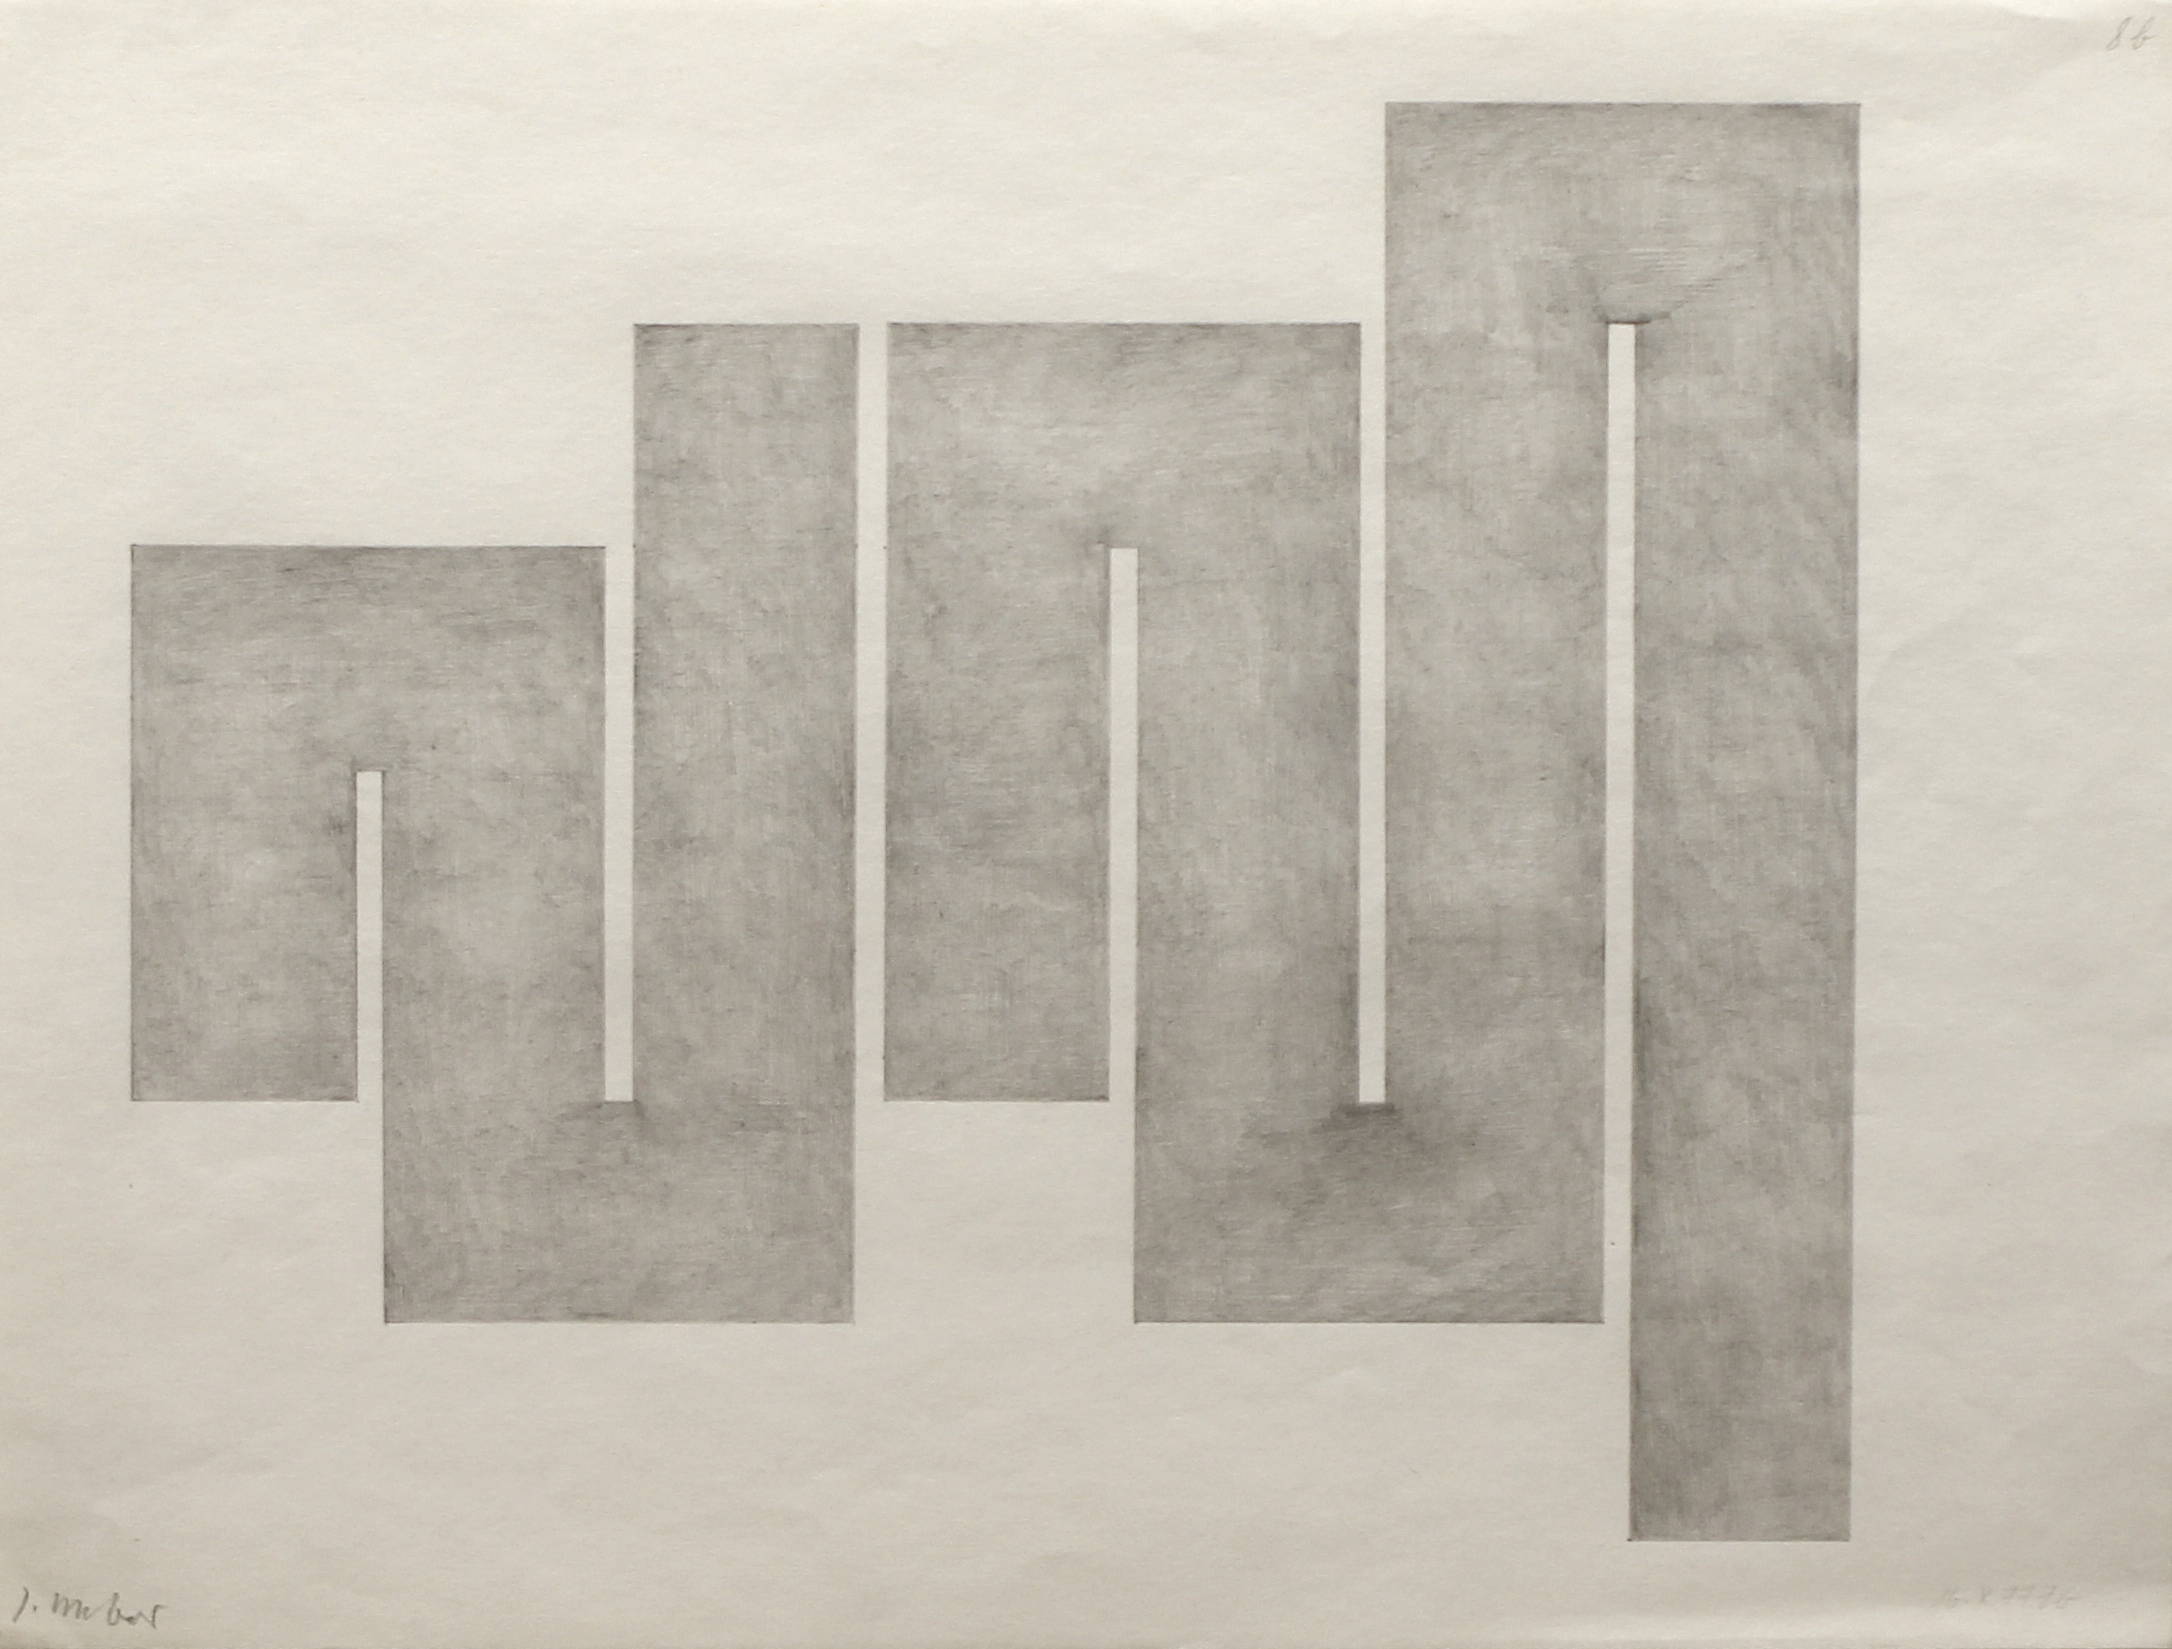 Untitled (6b) 14 October 1977, pencil on paper, 30 x 39.5 cm, 1977